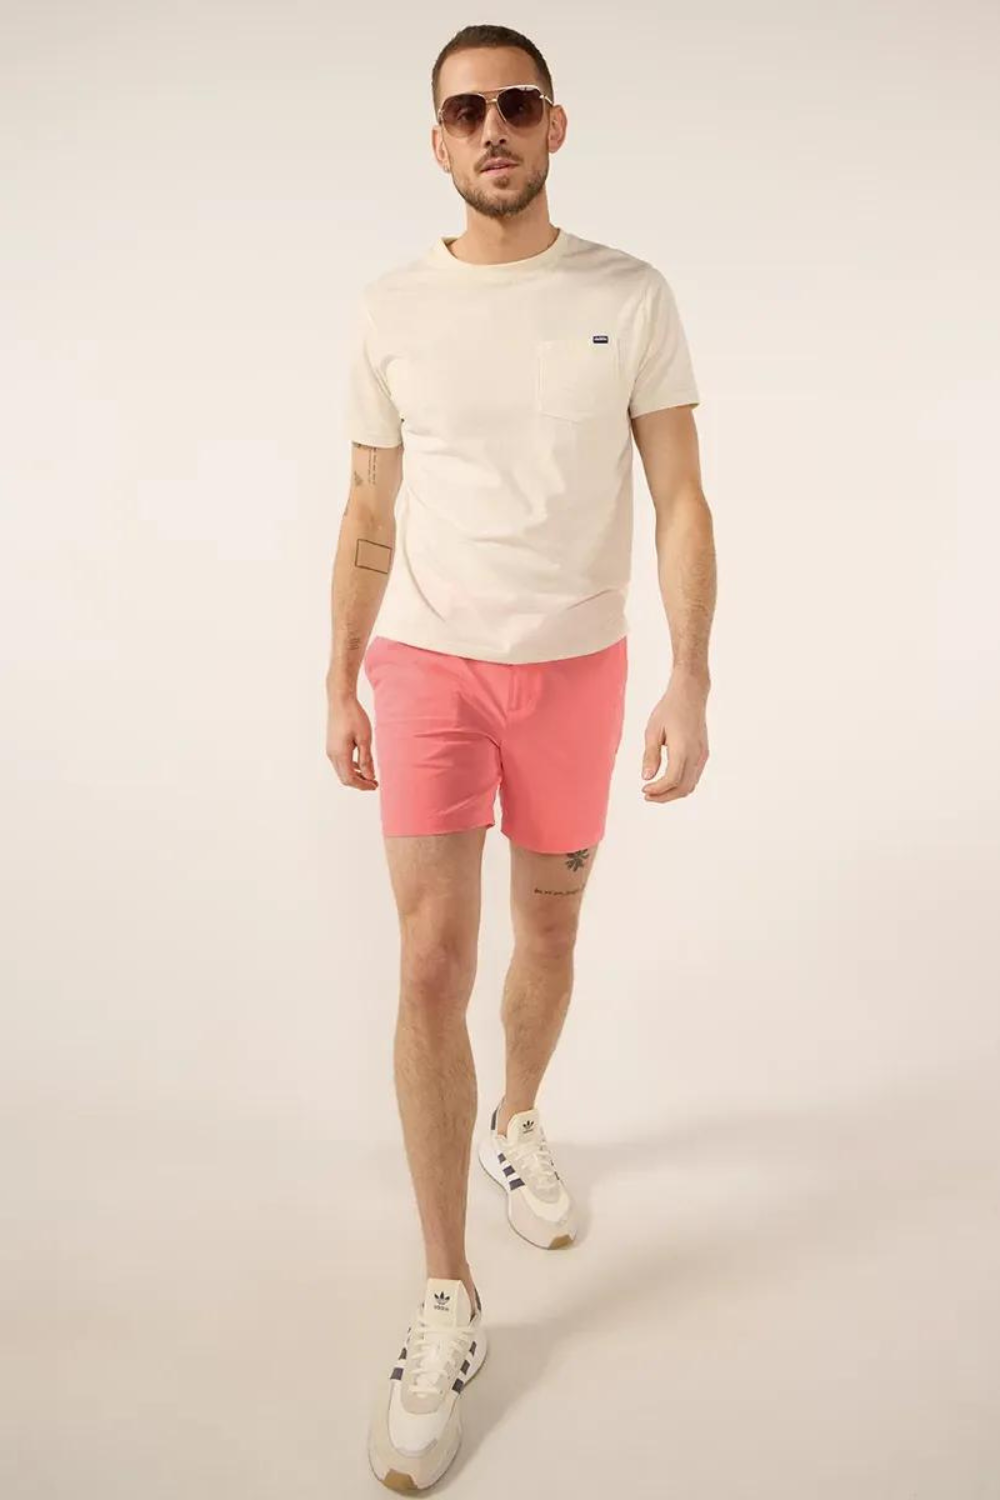 Chubbies The New Englands 6" Everywhere Performance Short